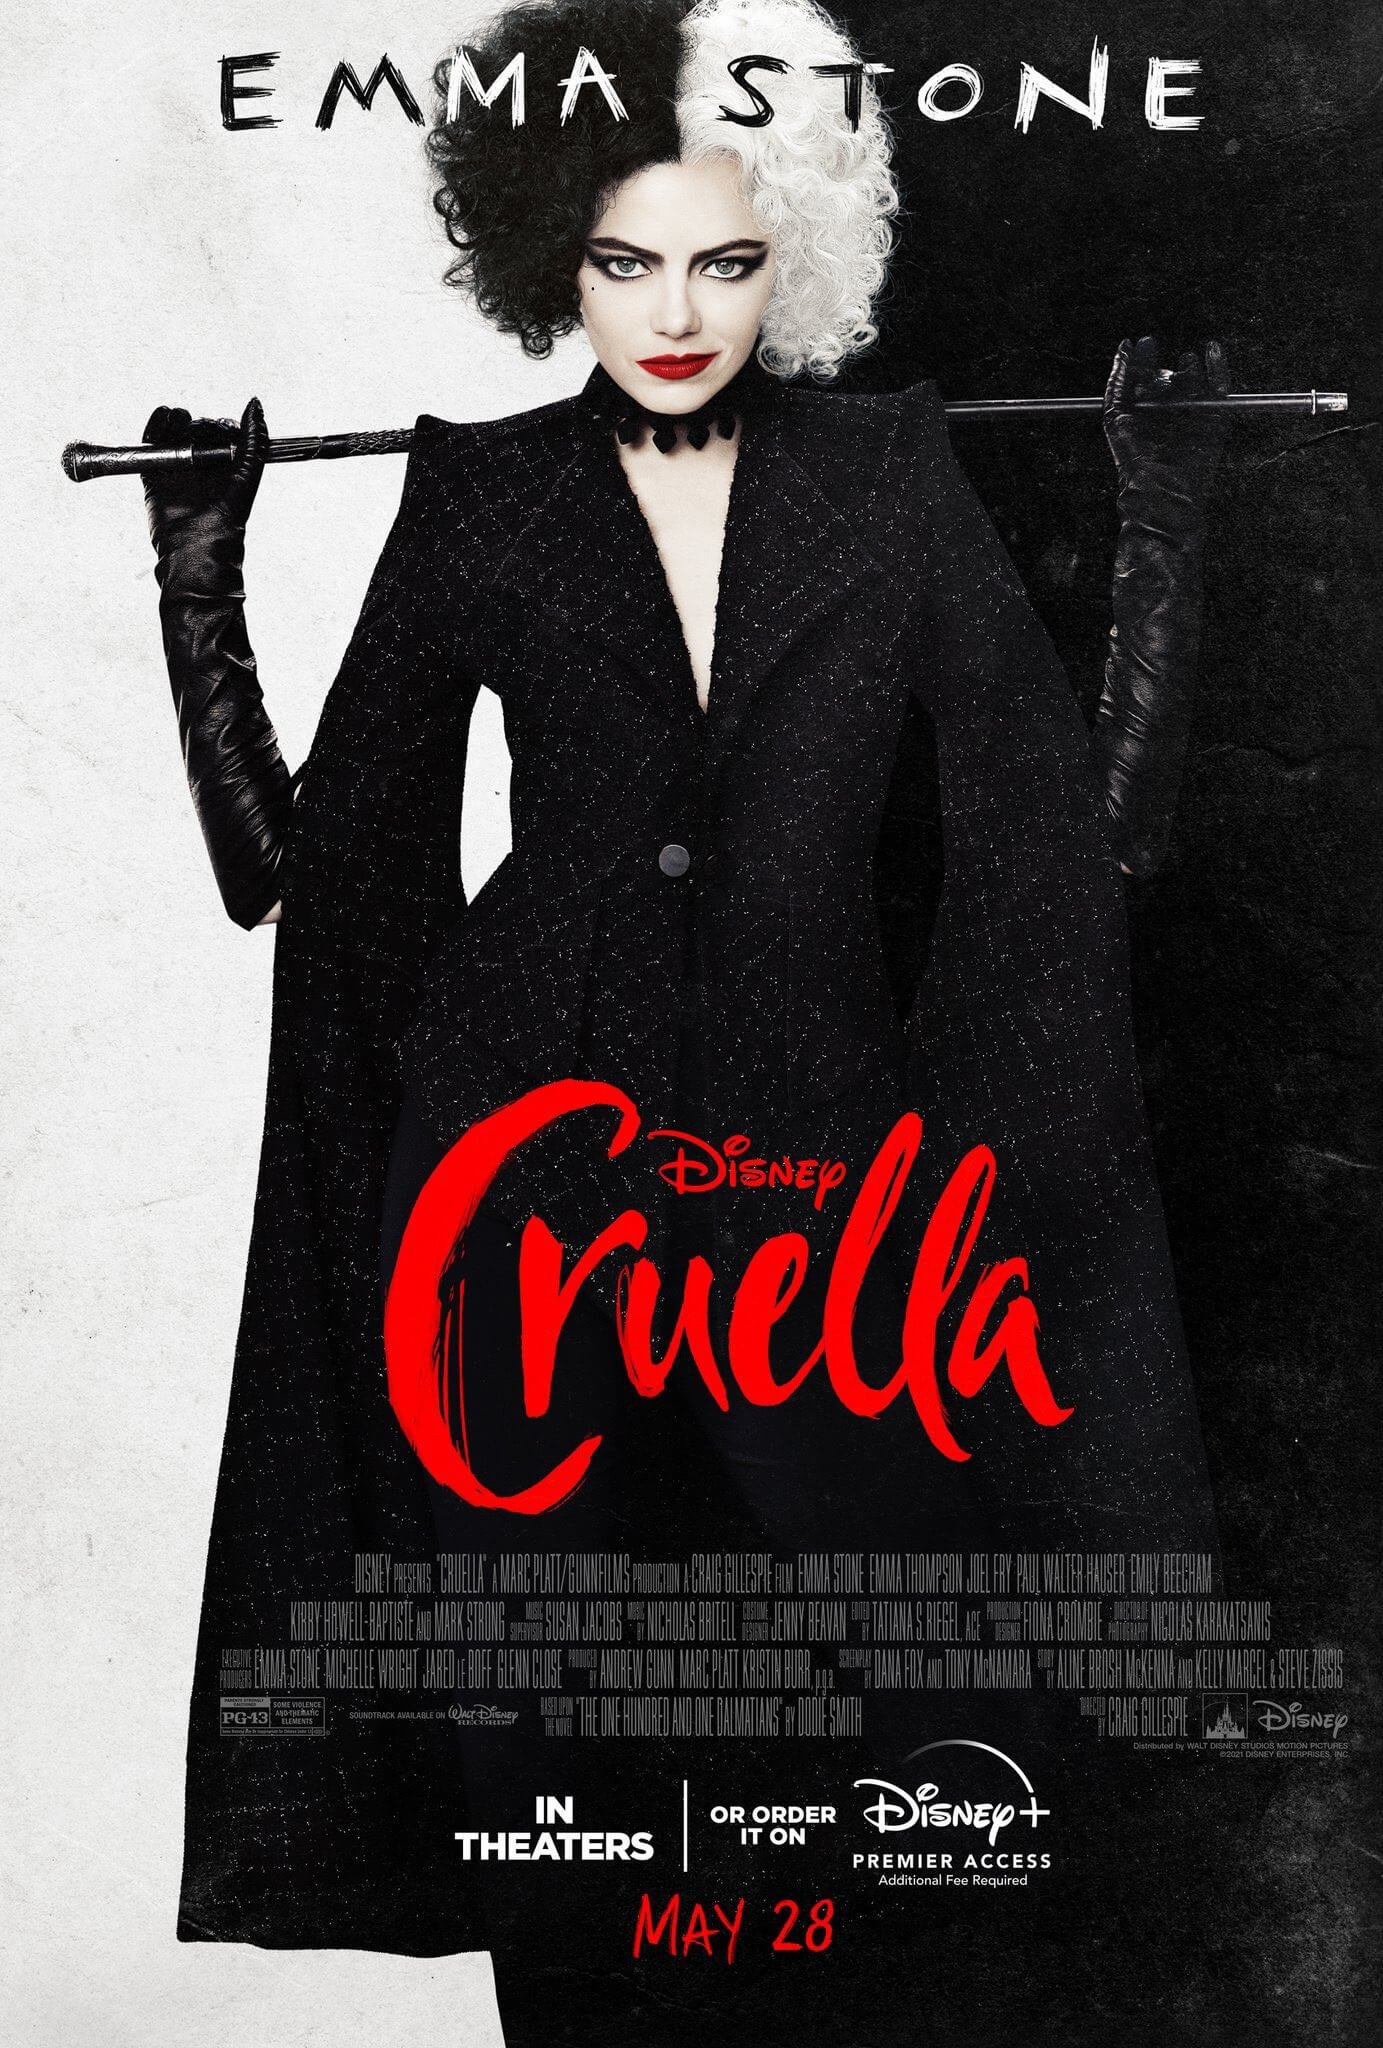 What To Expect From ‘Cruella’, According To Director Craig Gillespie